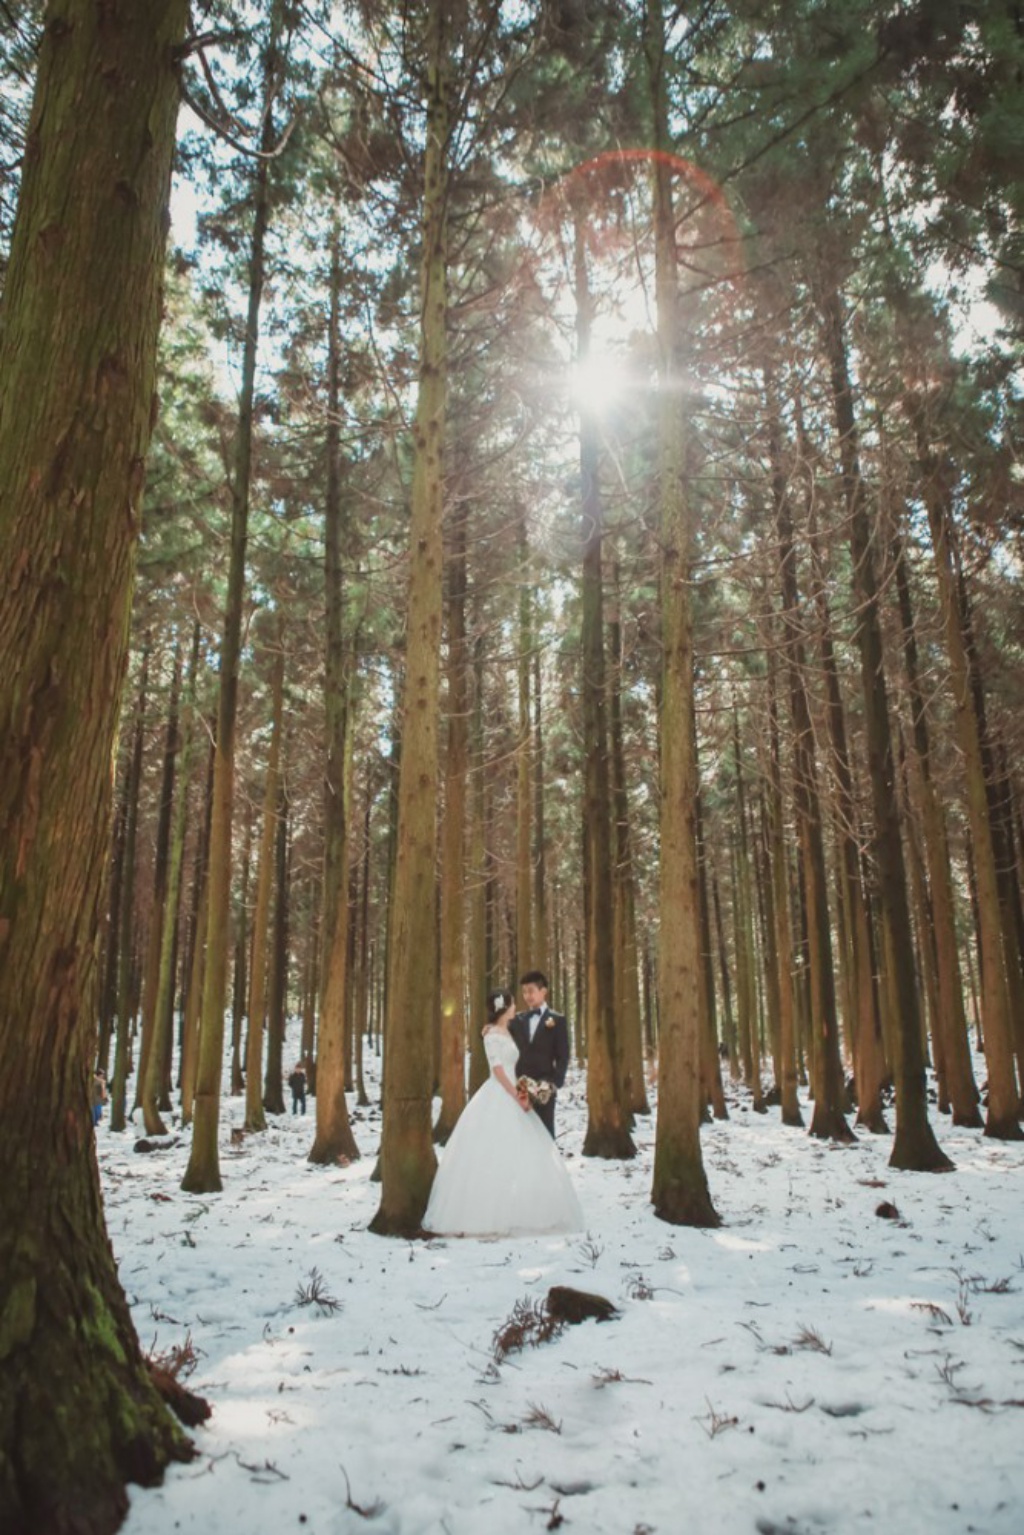 Korea Outdoor Pre-Wedding Photoshoot At Jeju Island During Winter  by Byunghyun on OneThreeOneFour 9